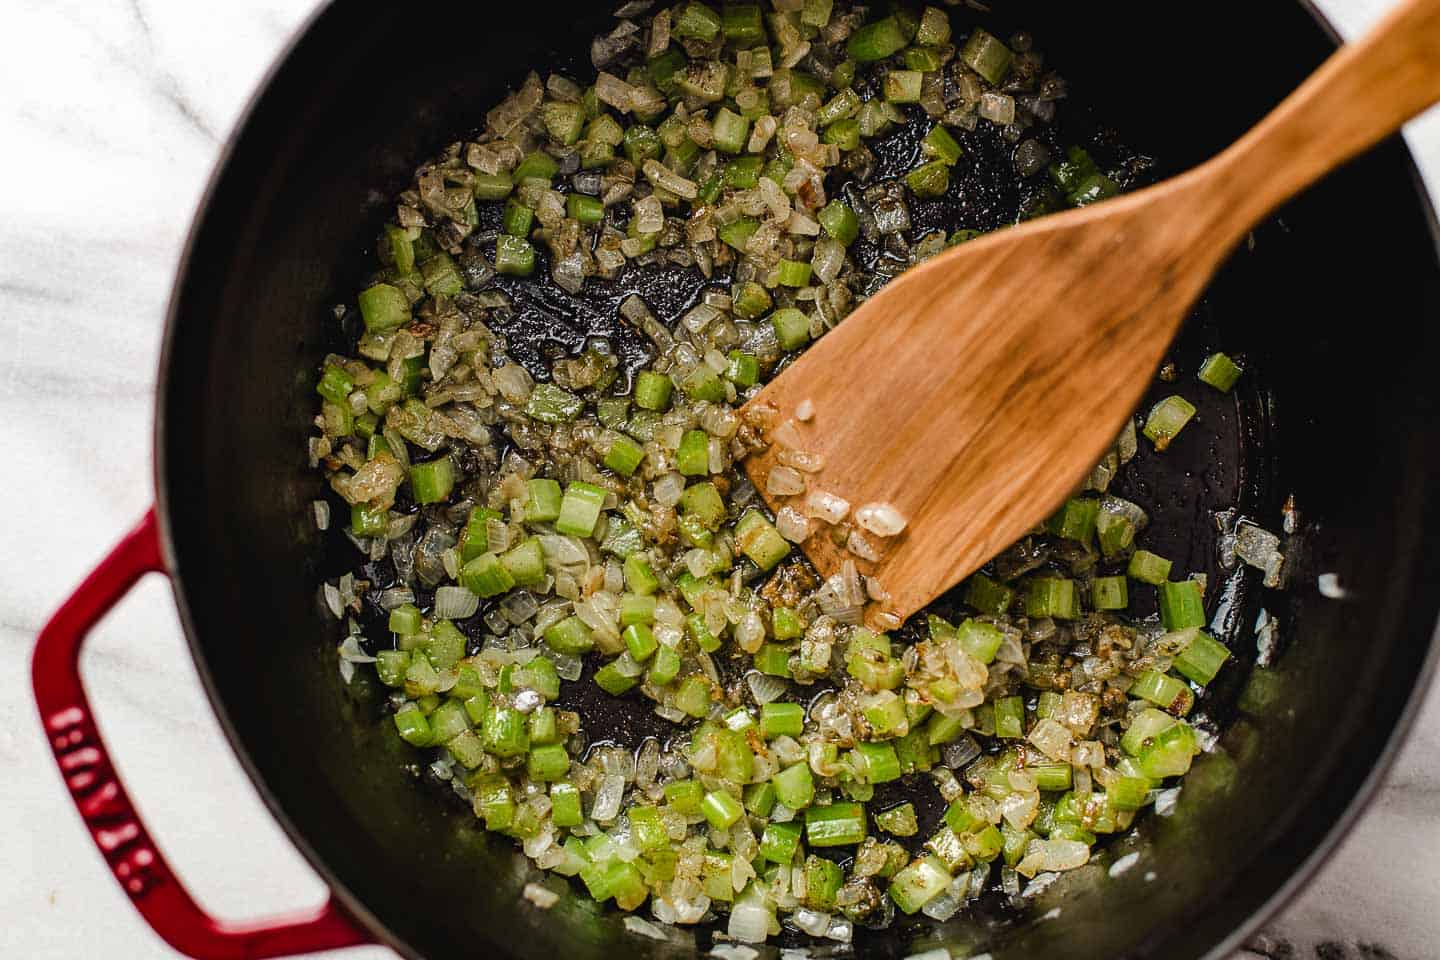 Diced celery and onions cooking in a pot.